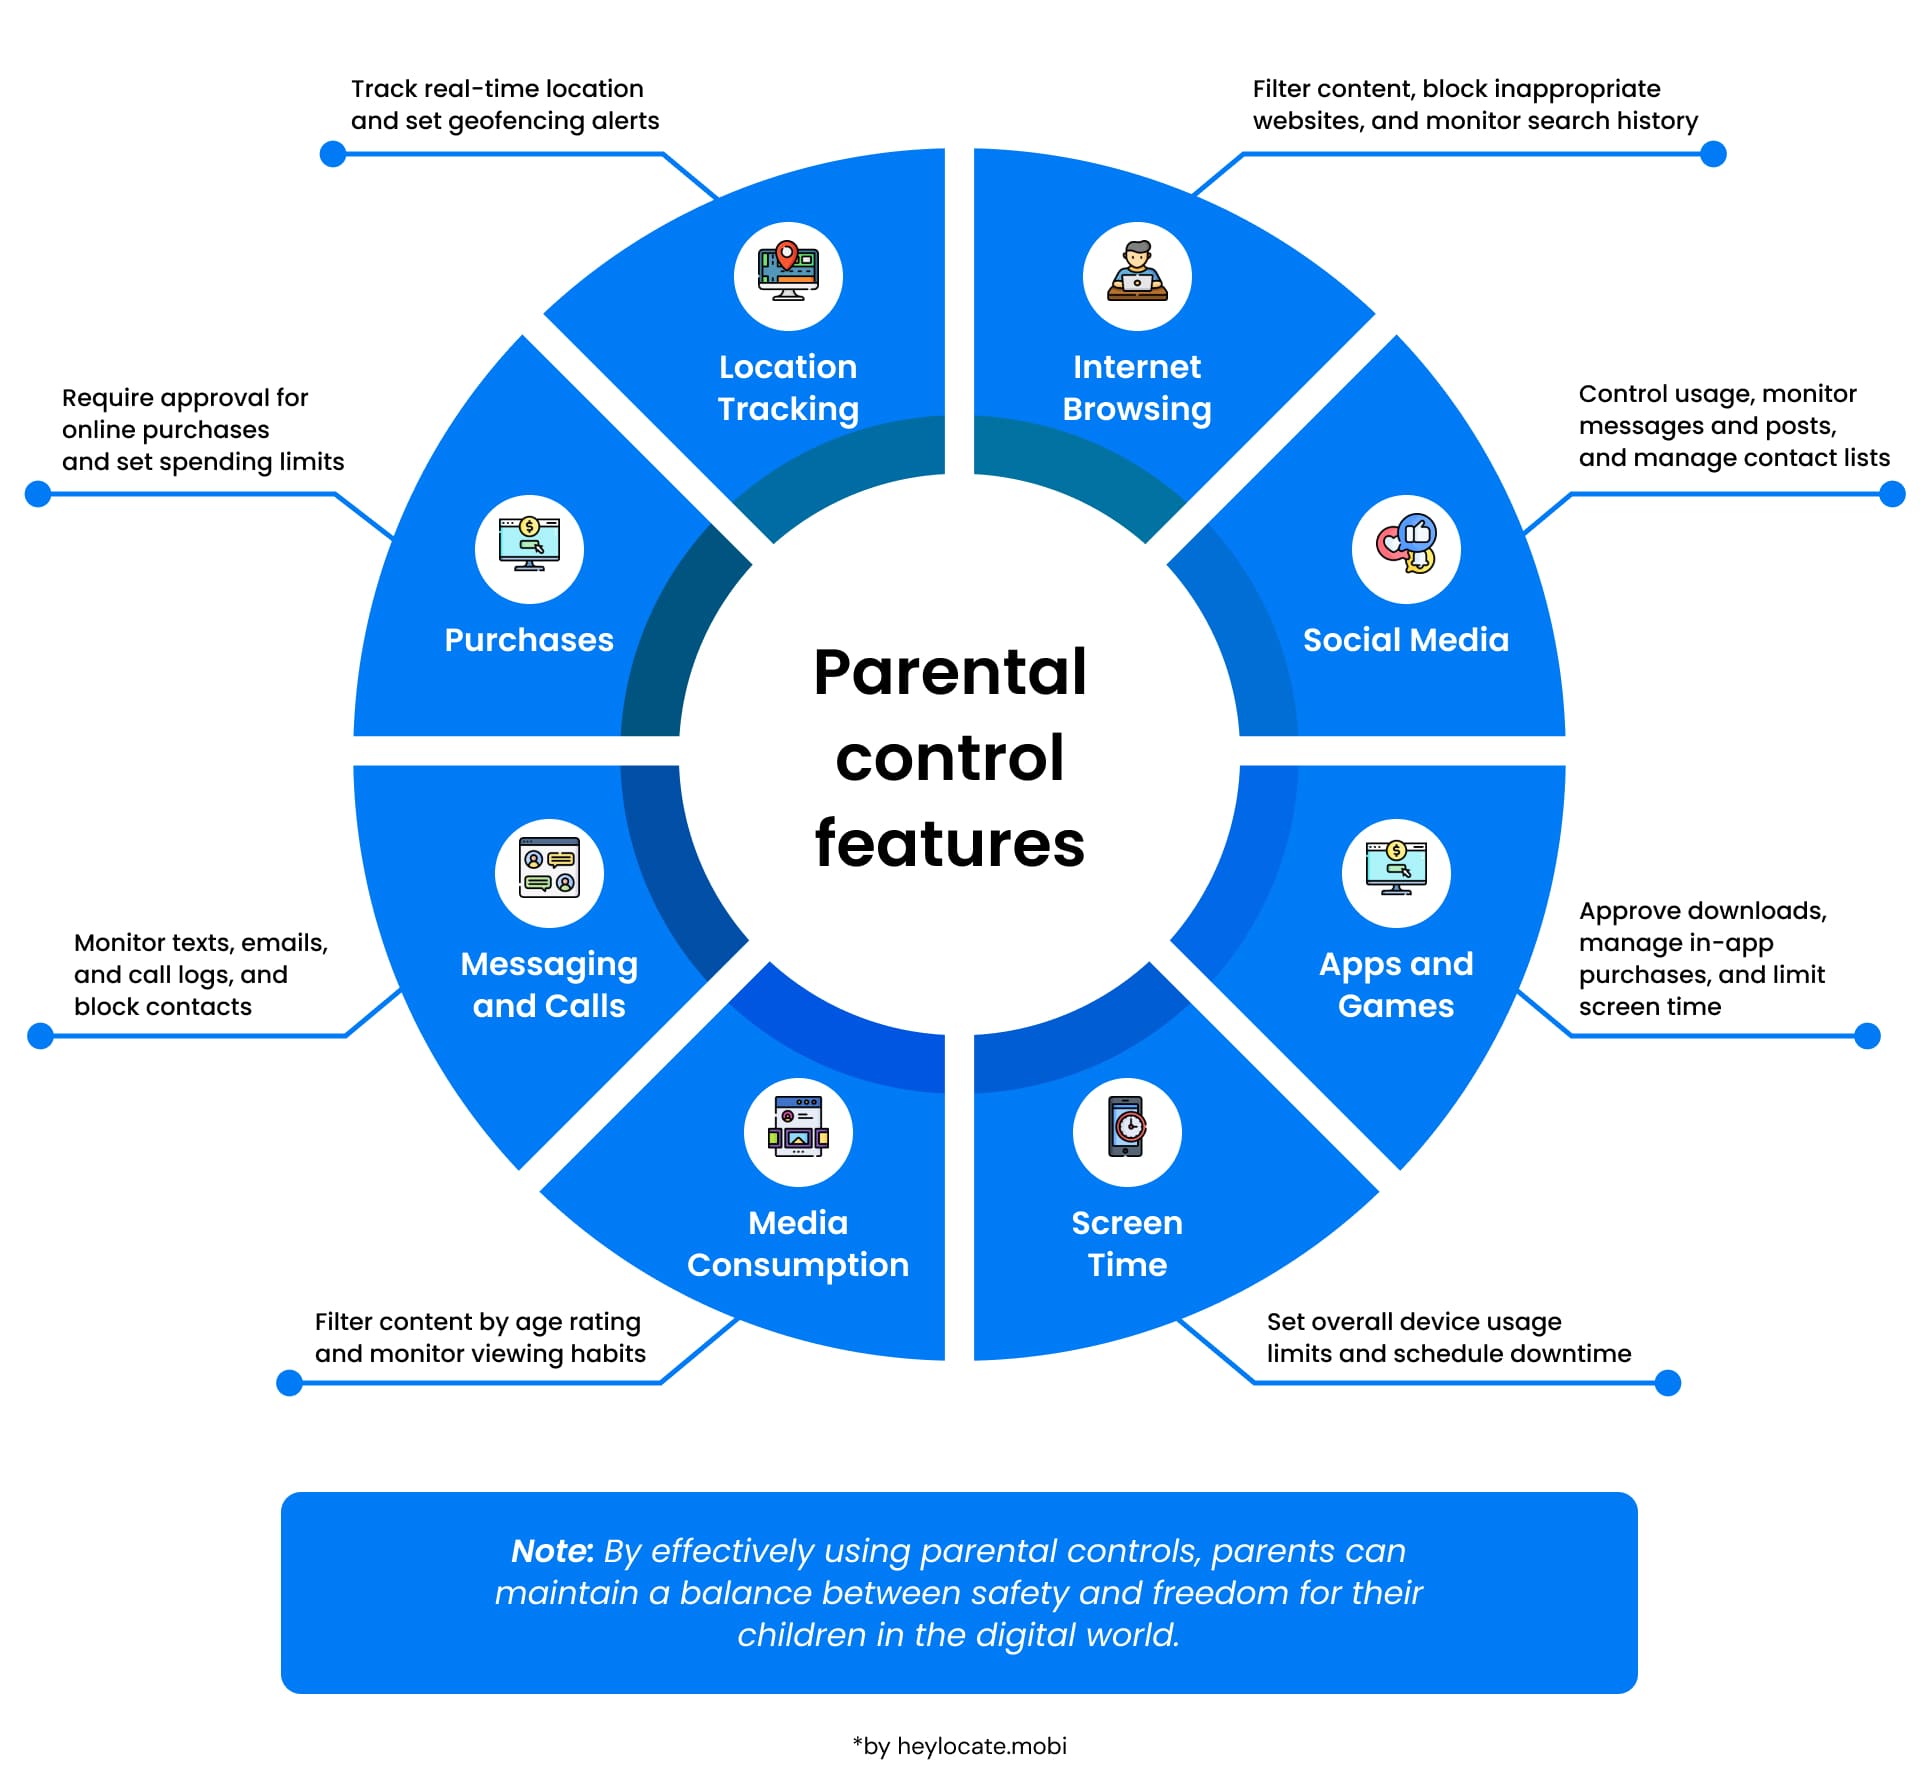 A Circle of Safety: The array of parental control features designed to protect children's online interactions